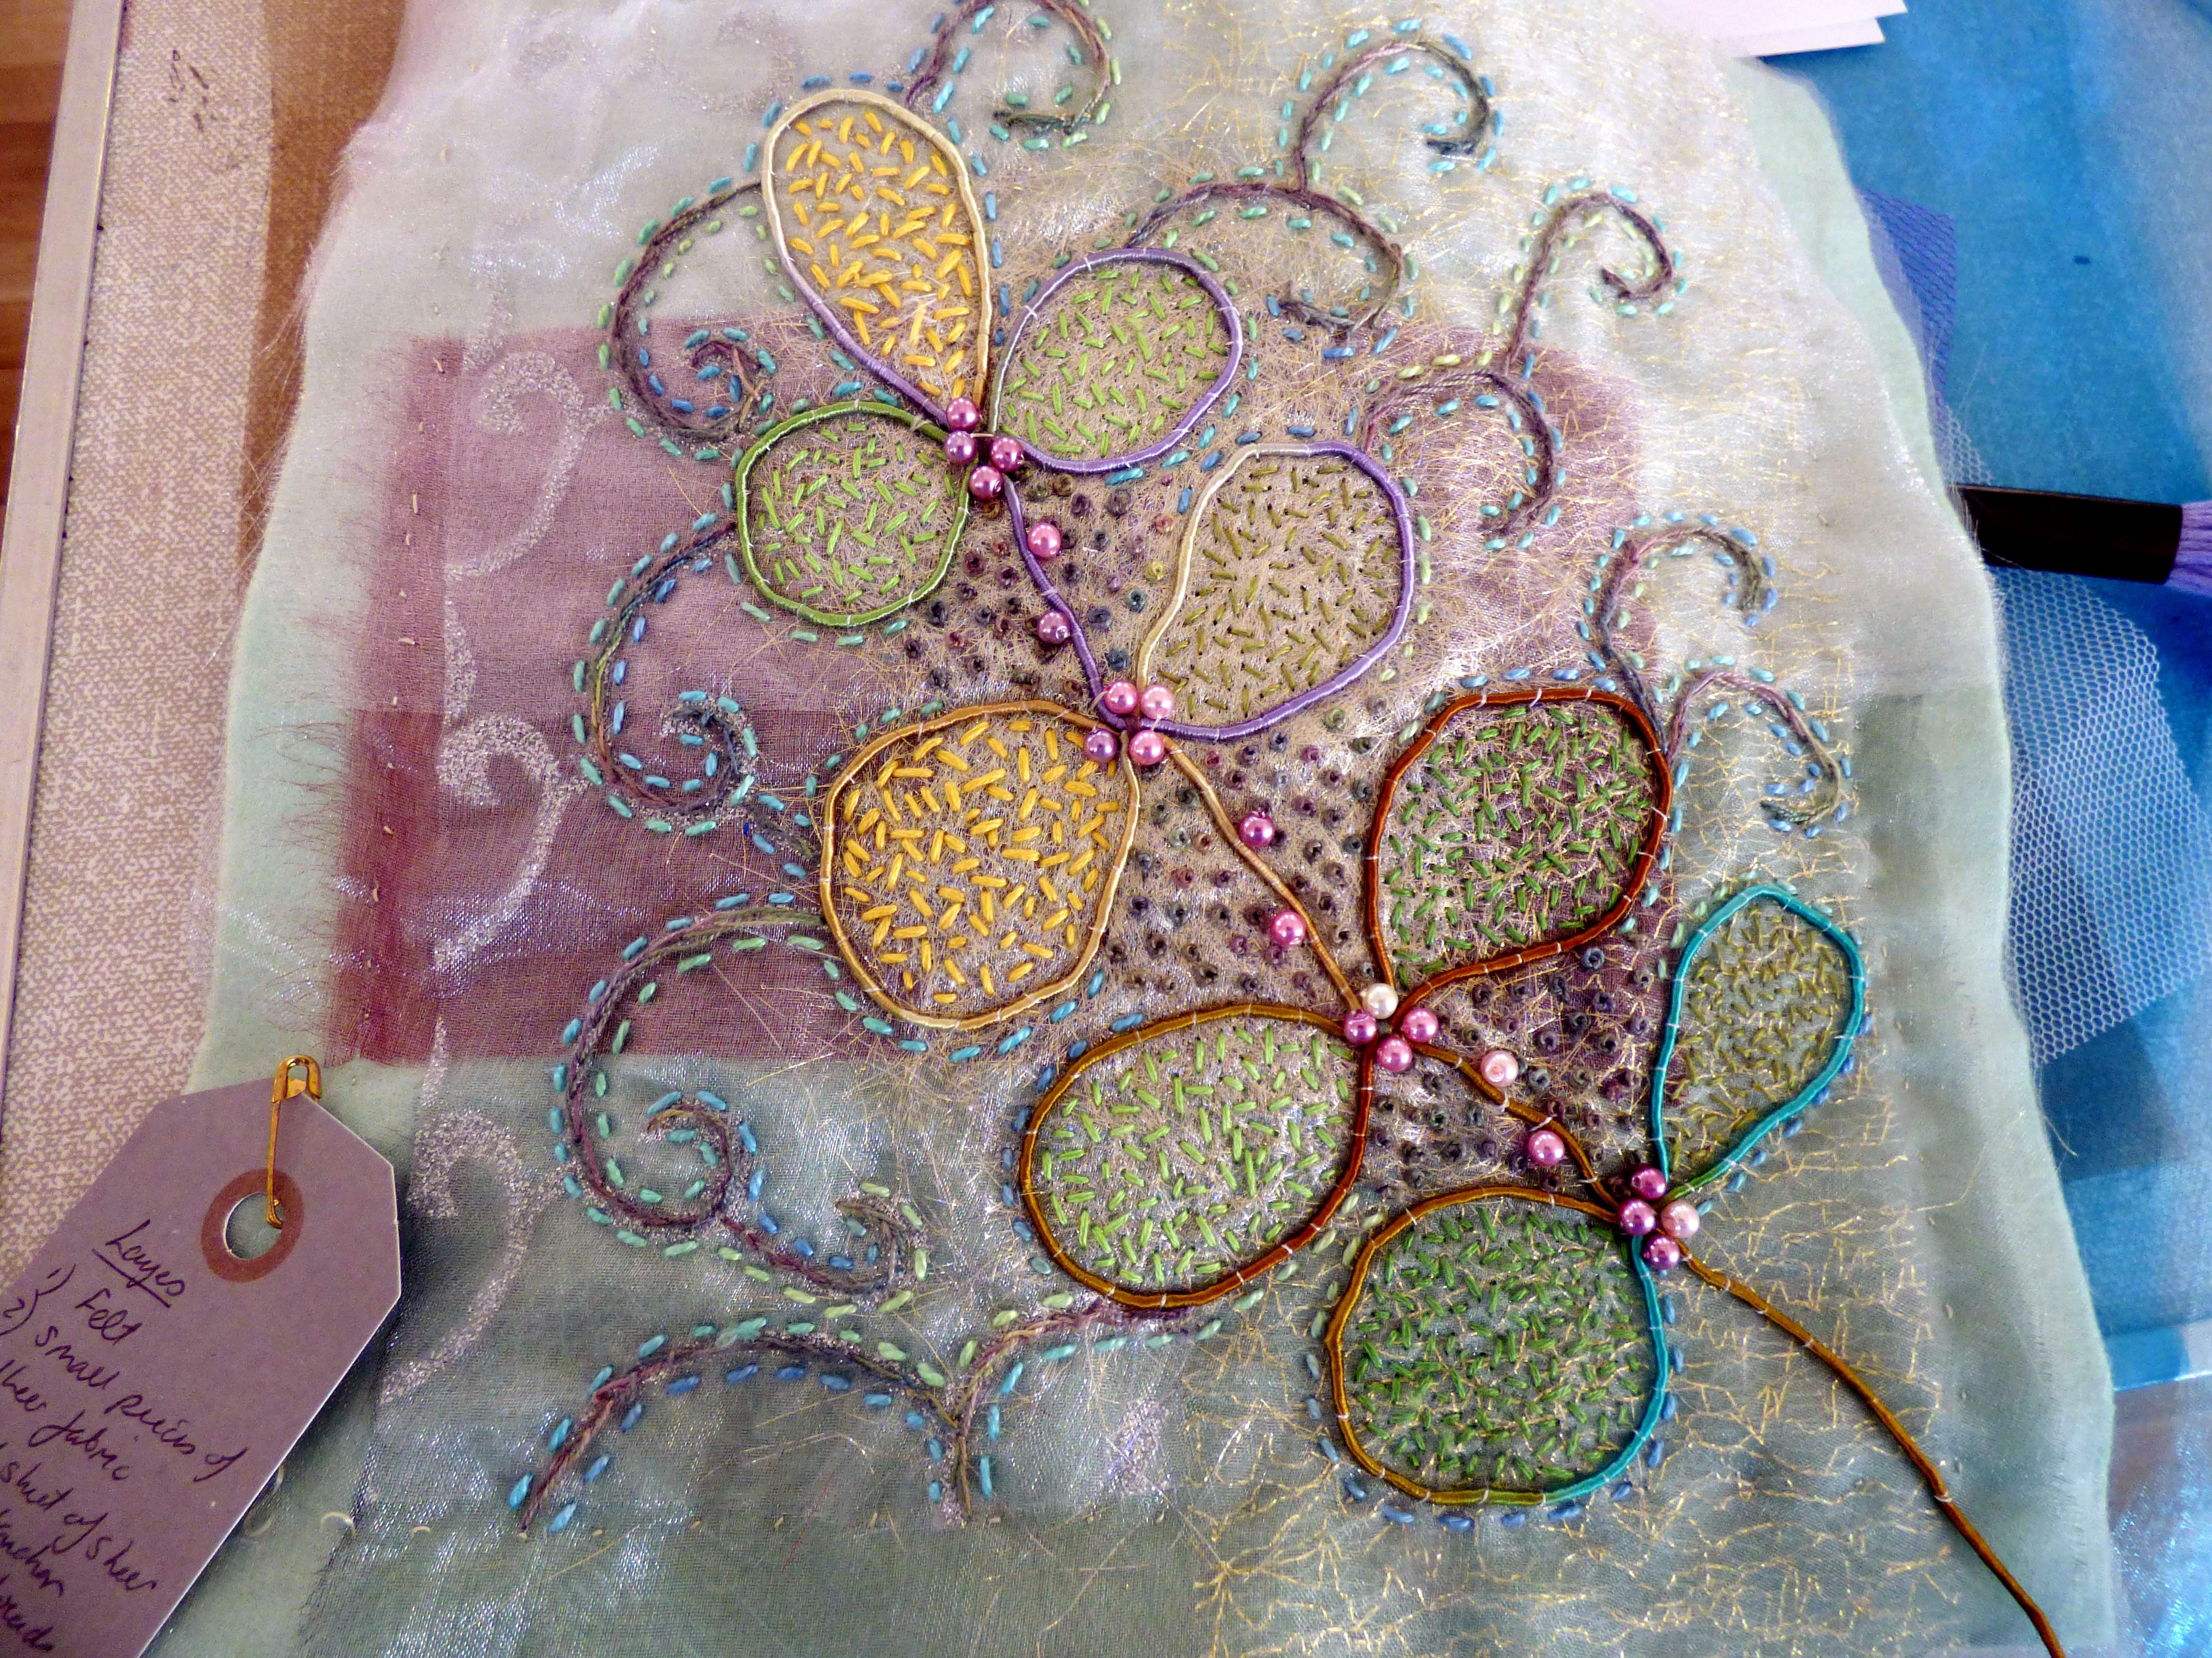 sample by Gill Roberts at Layers, Texturing and Stitch workshop 2022